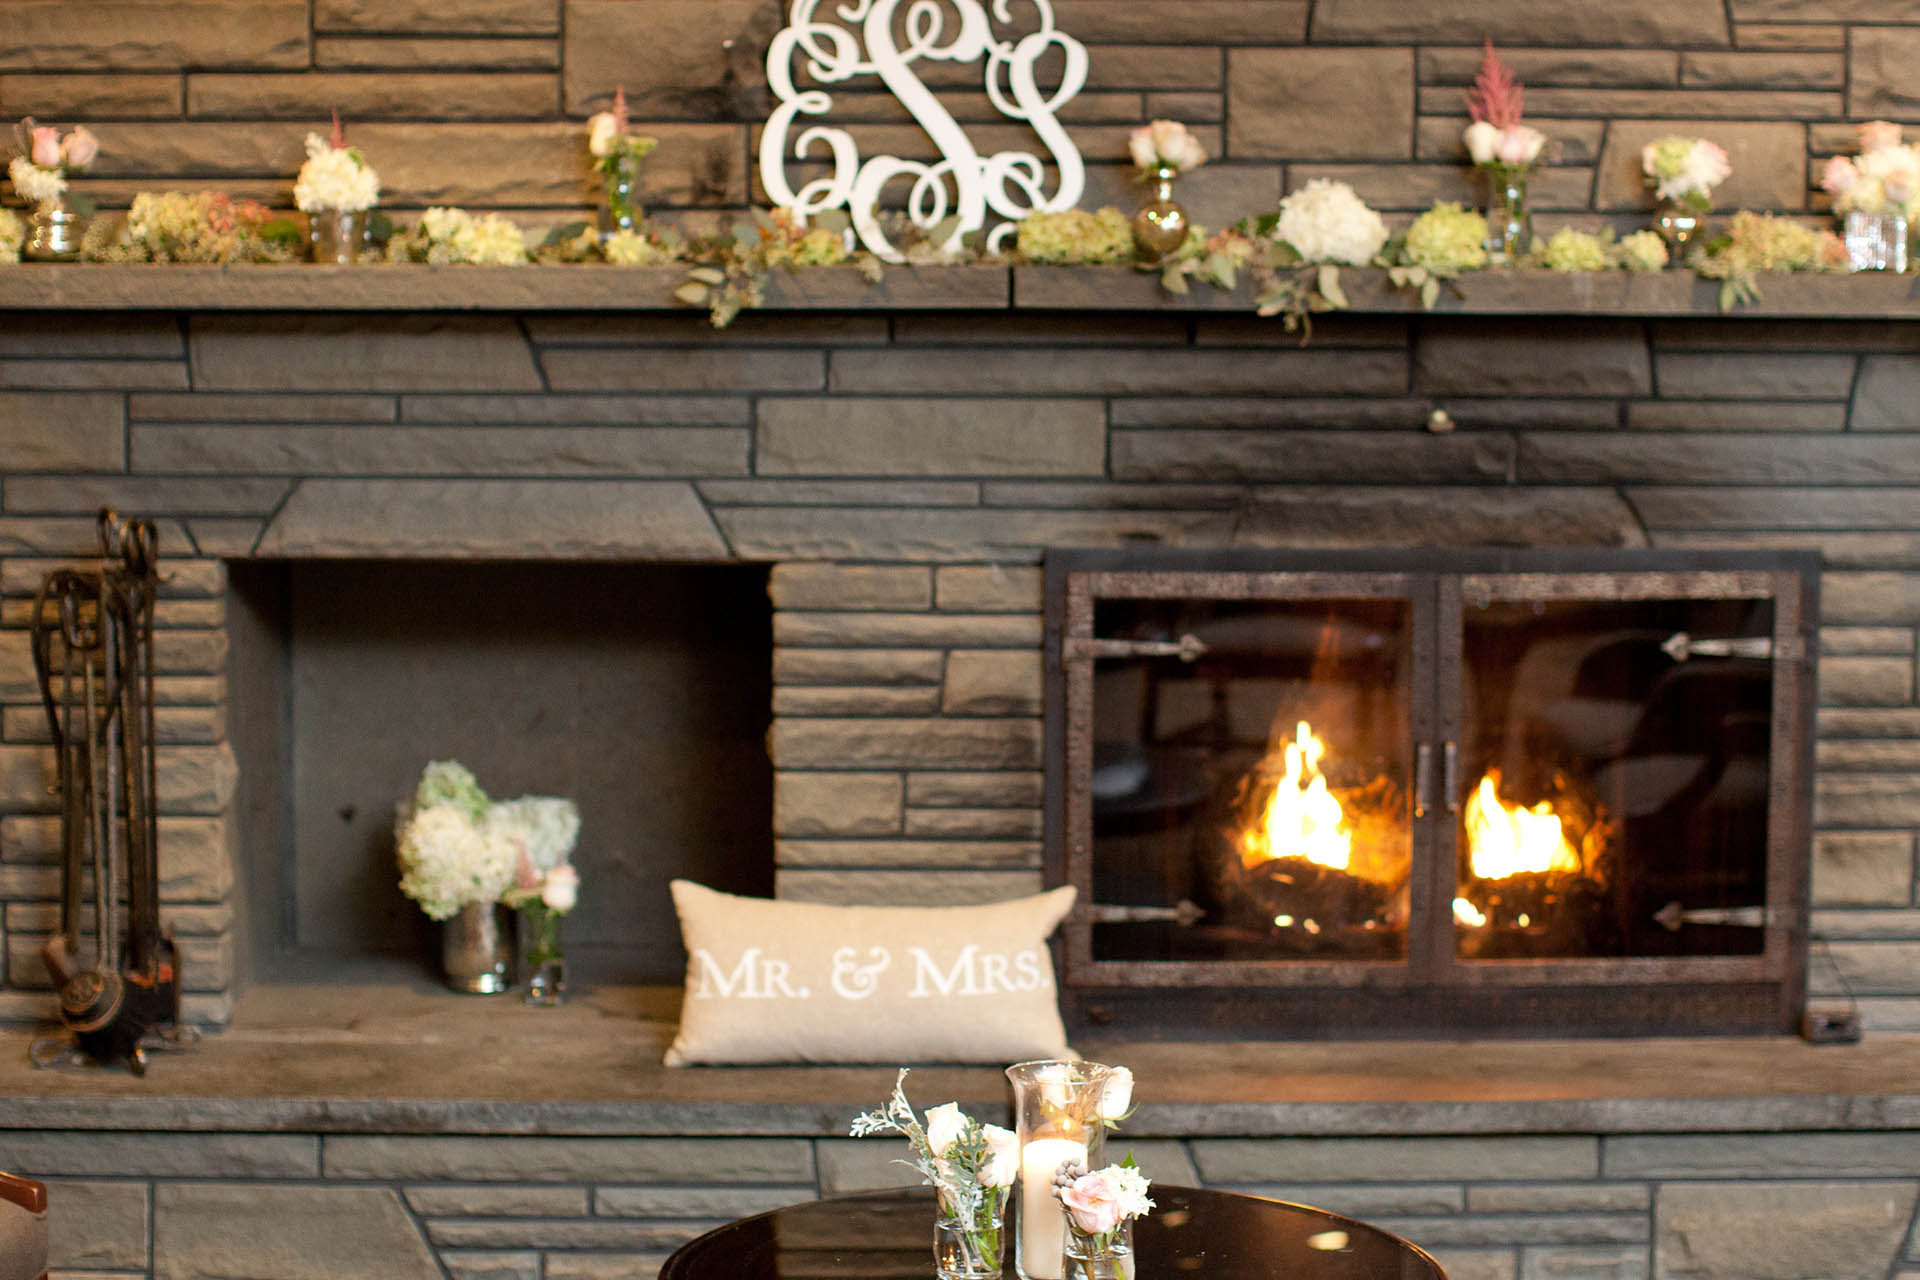 Wedding reception fireplace with decorative garlands.